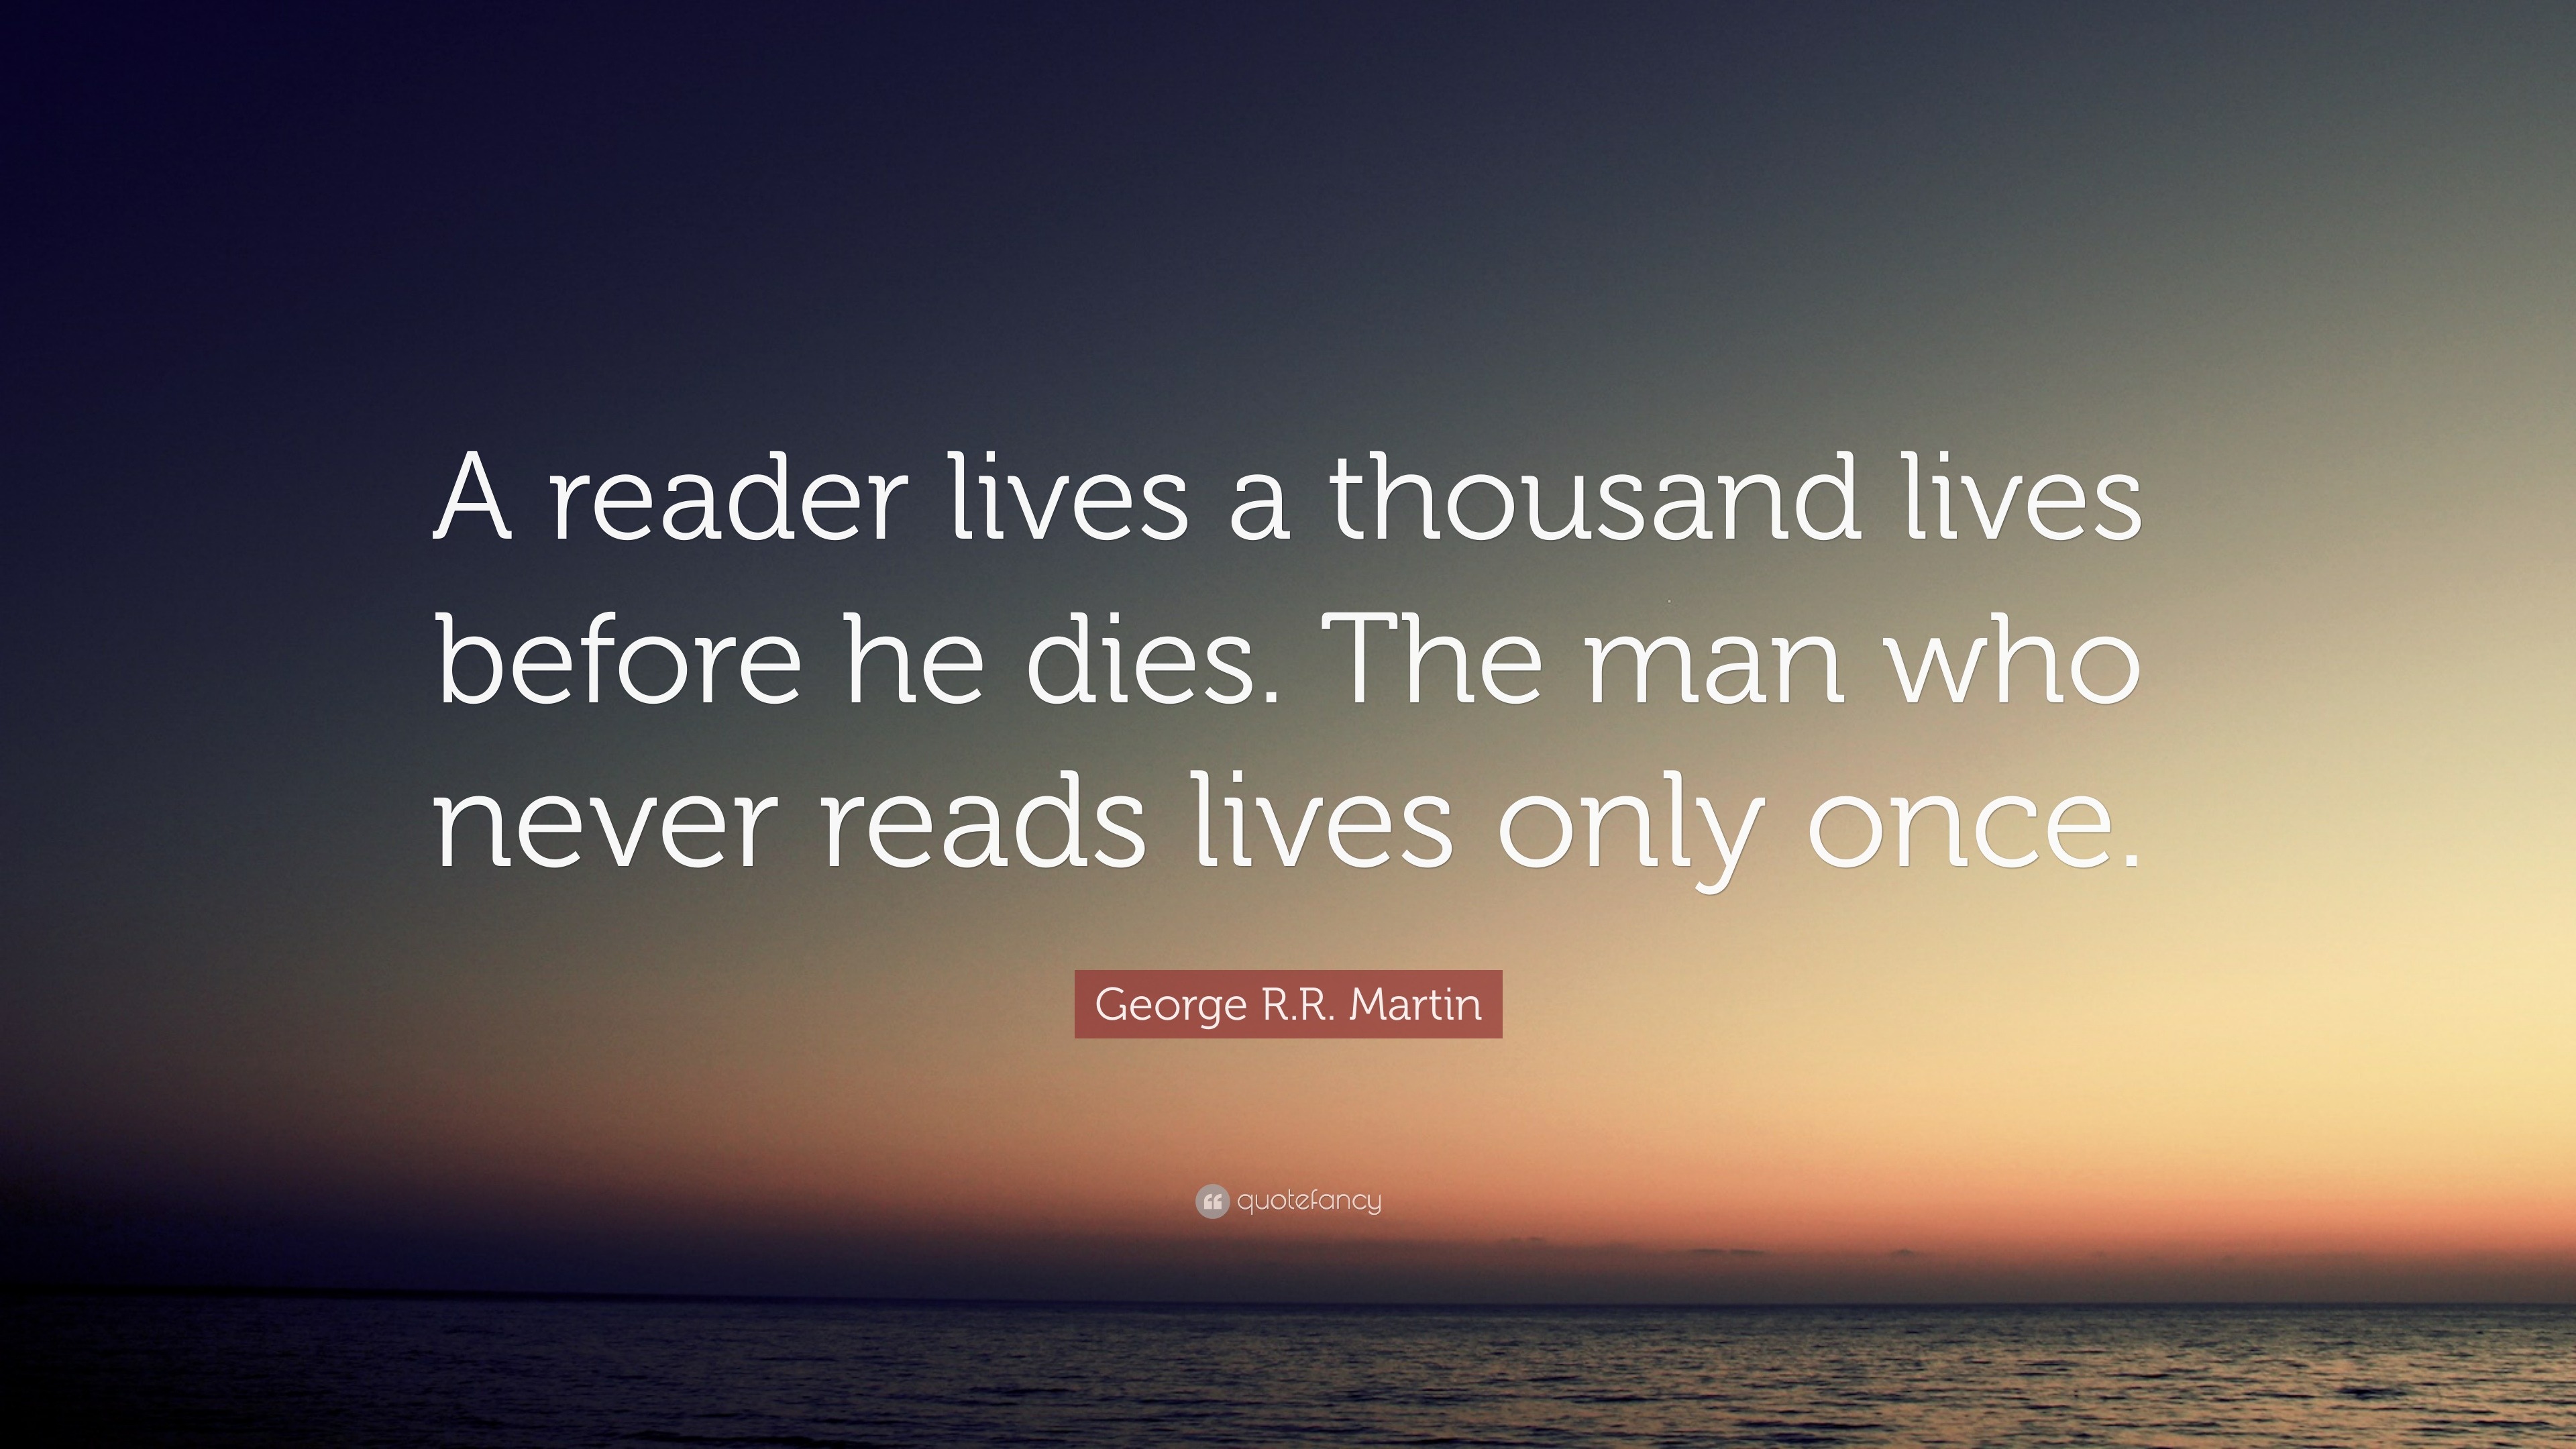 George R.R. Martin Quote: “A reader lives a thousand lives before he ...